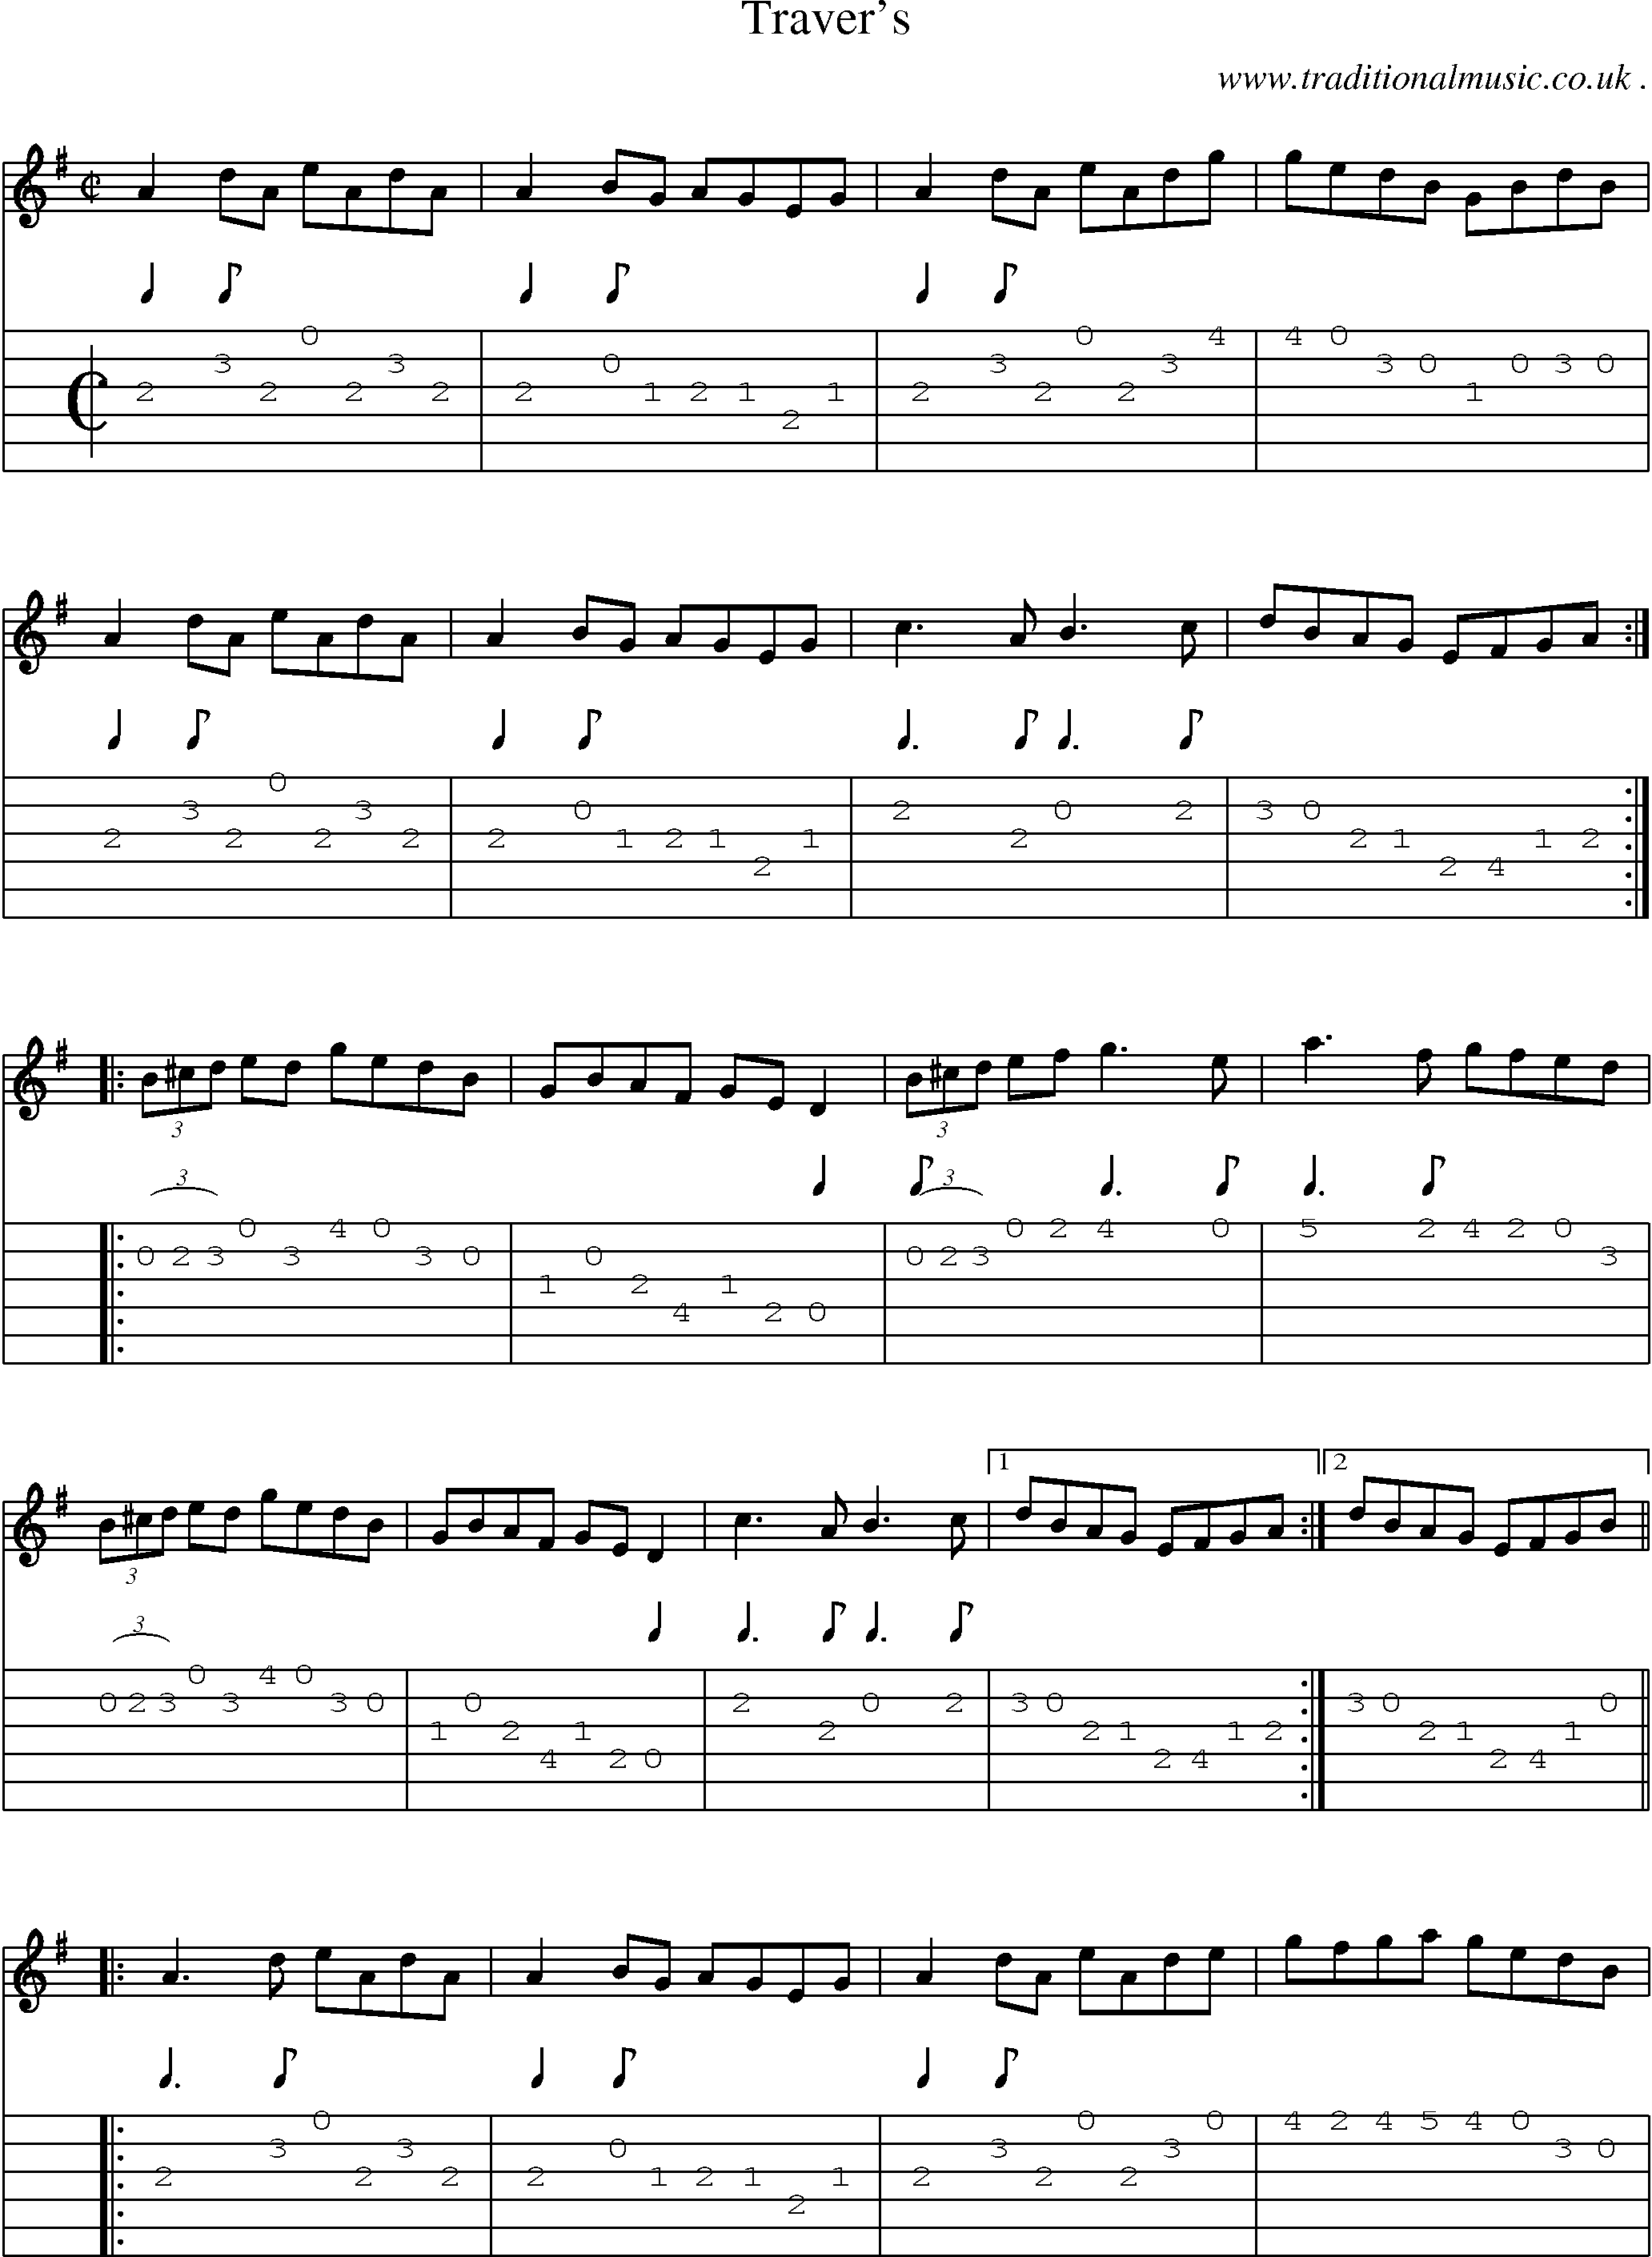 Sheet-Music and Guitar Tabs for Travers